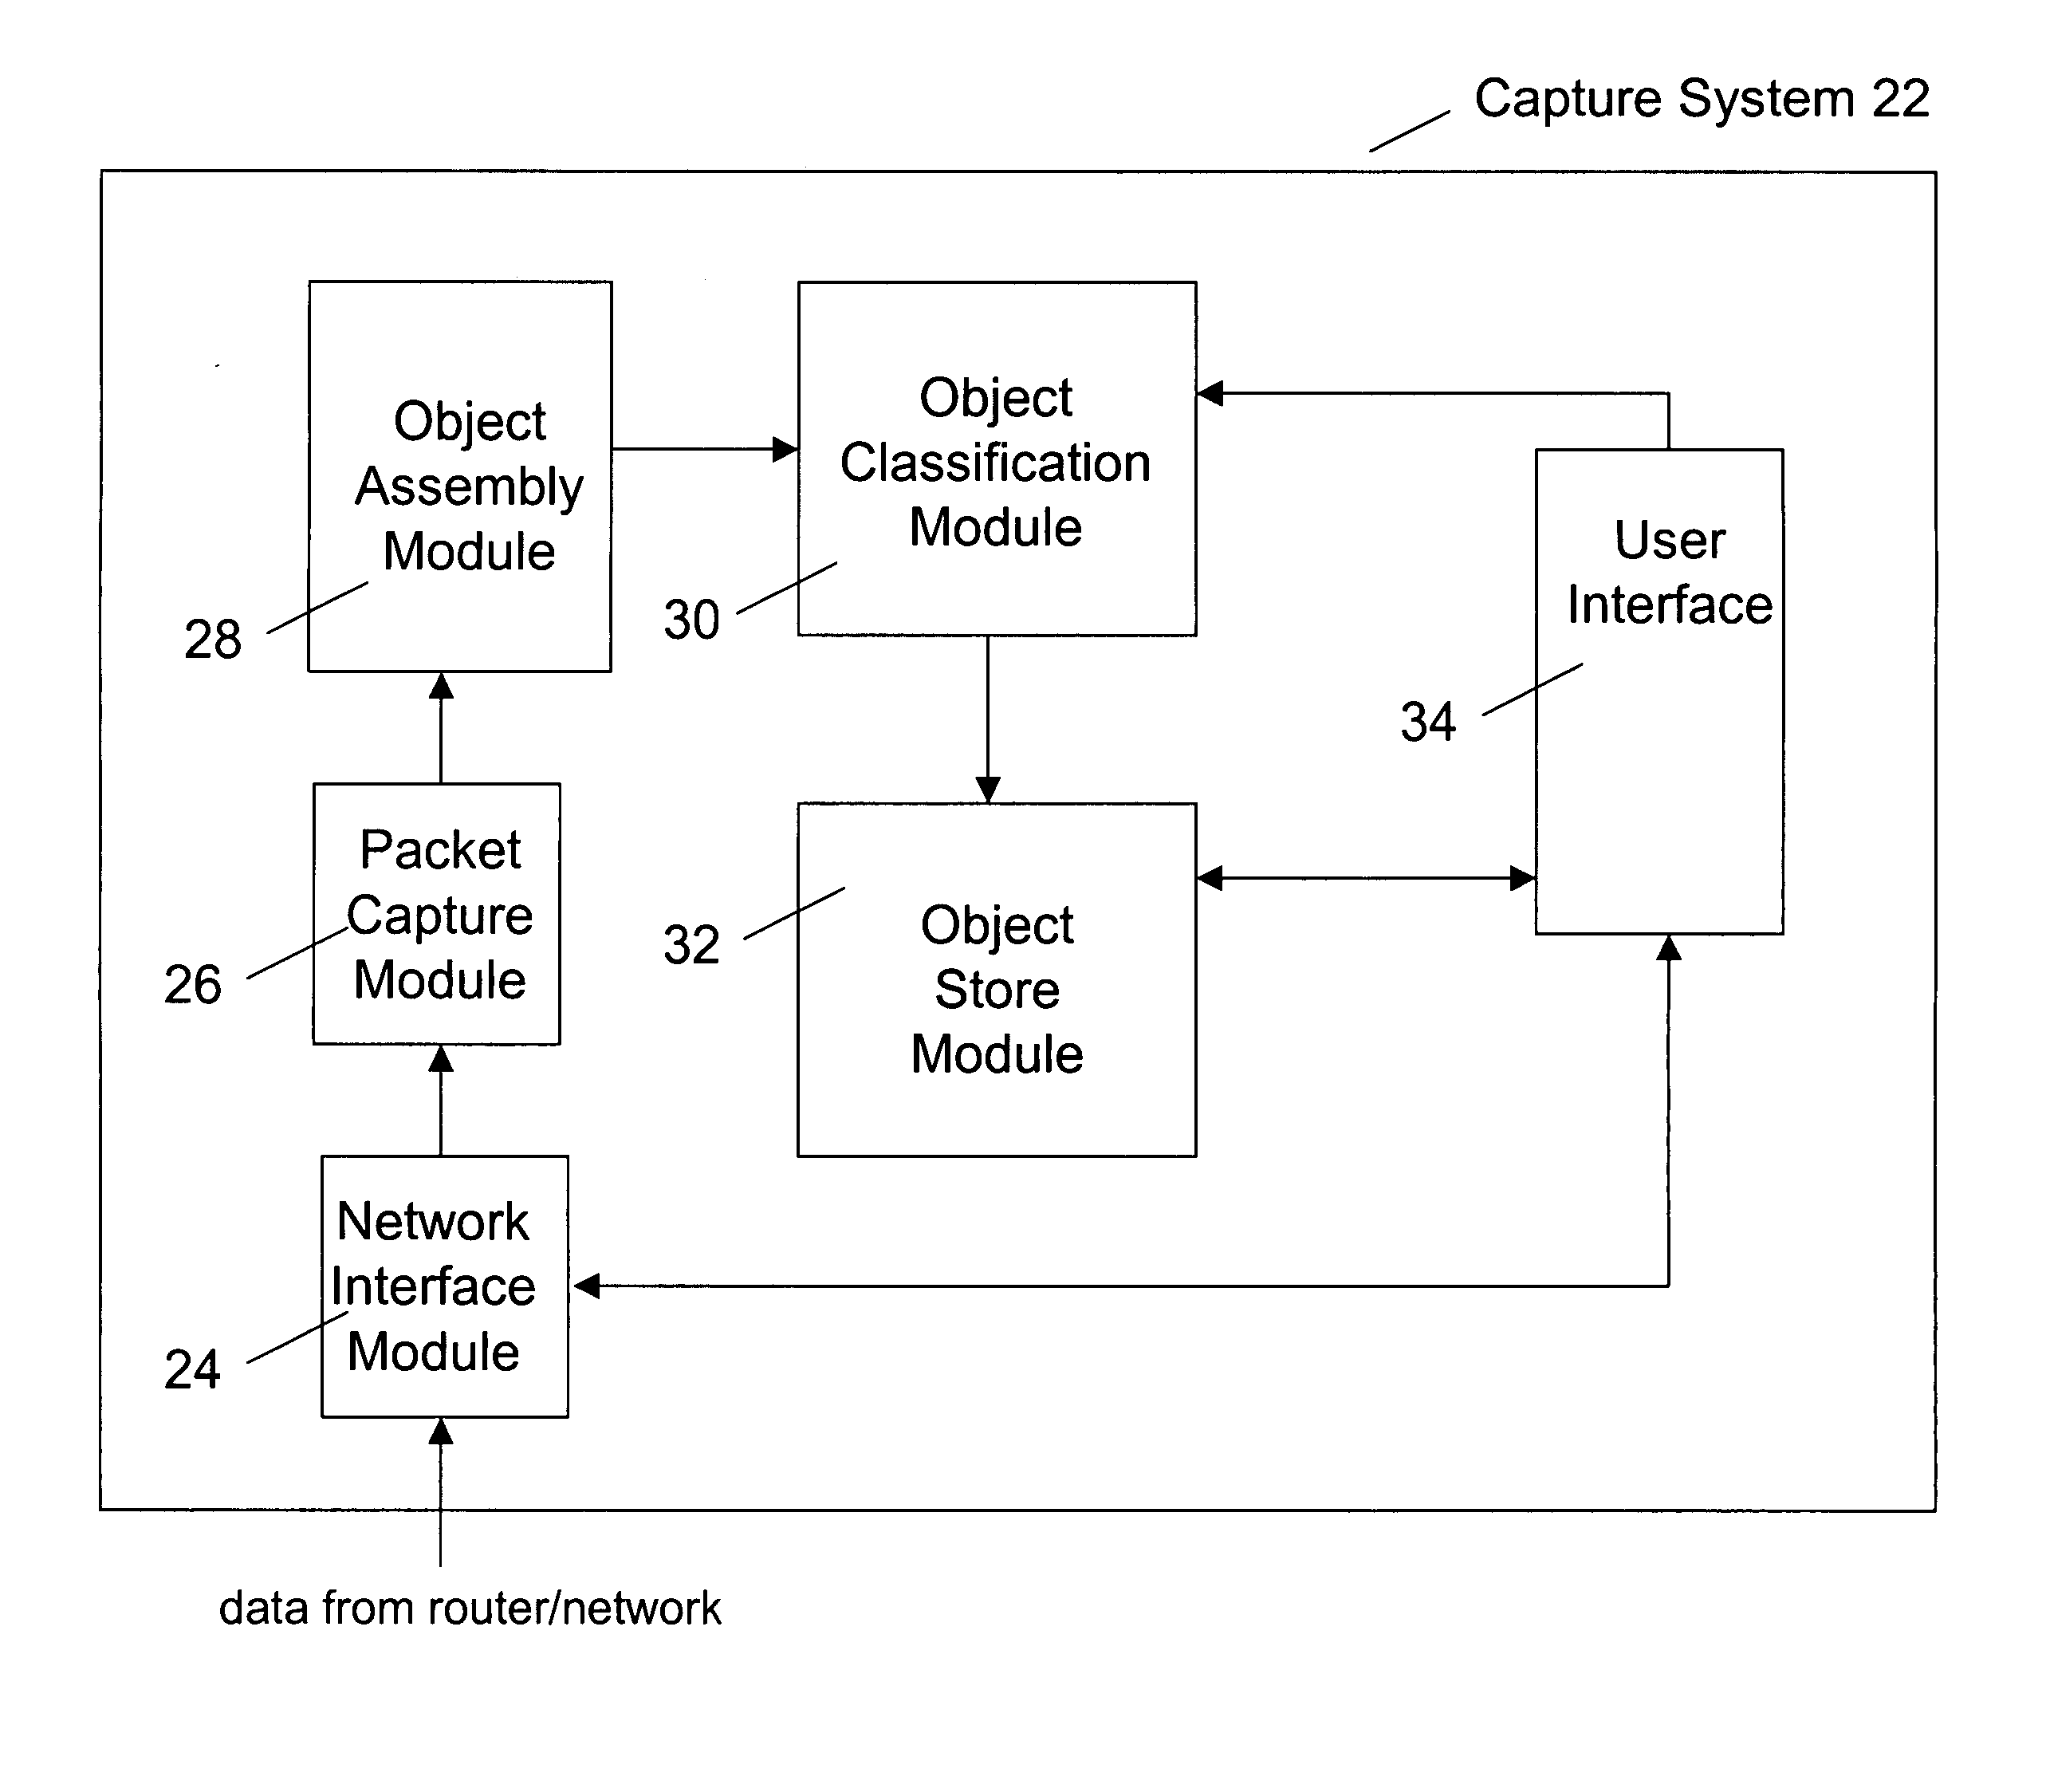 Database for a capture system